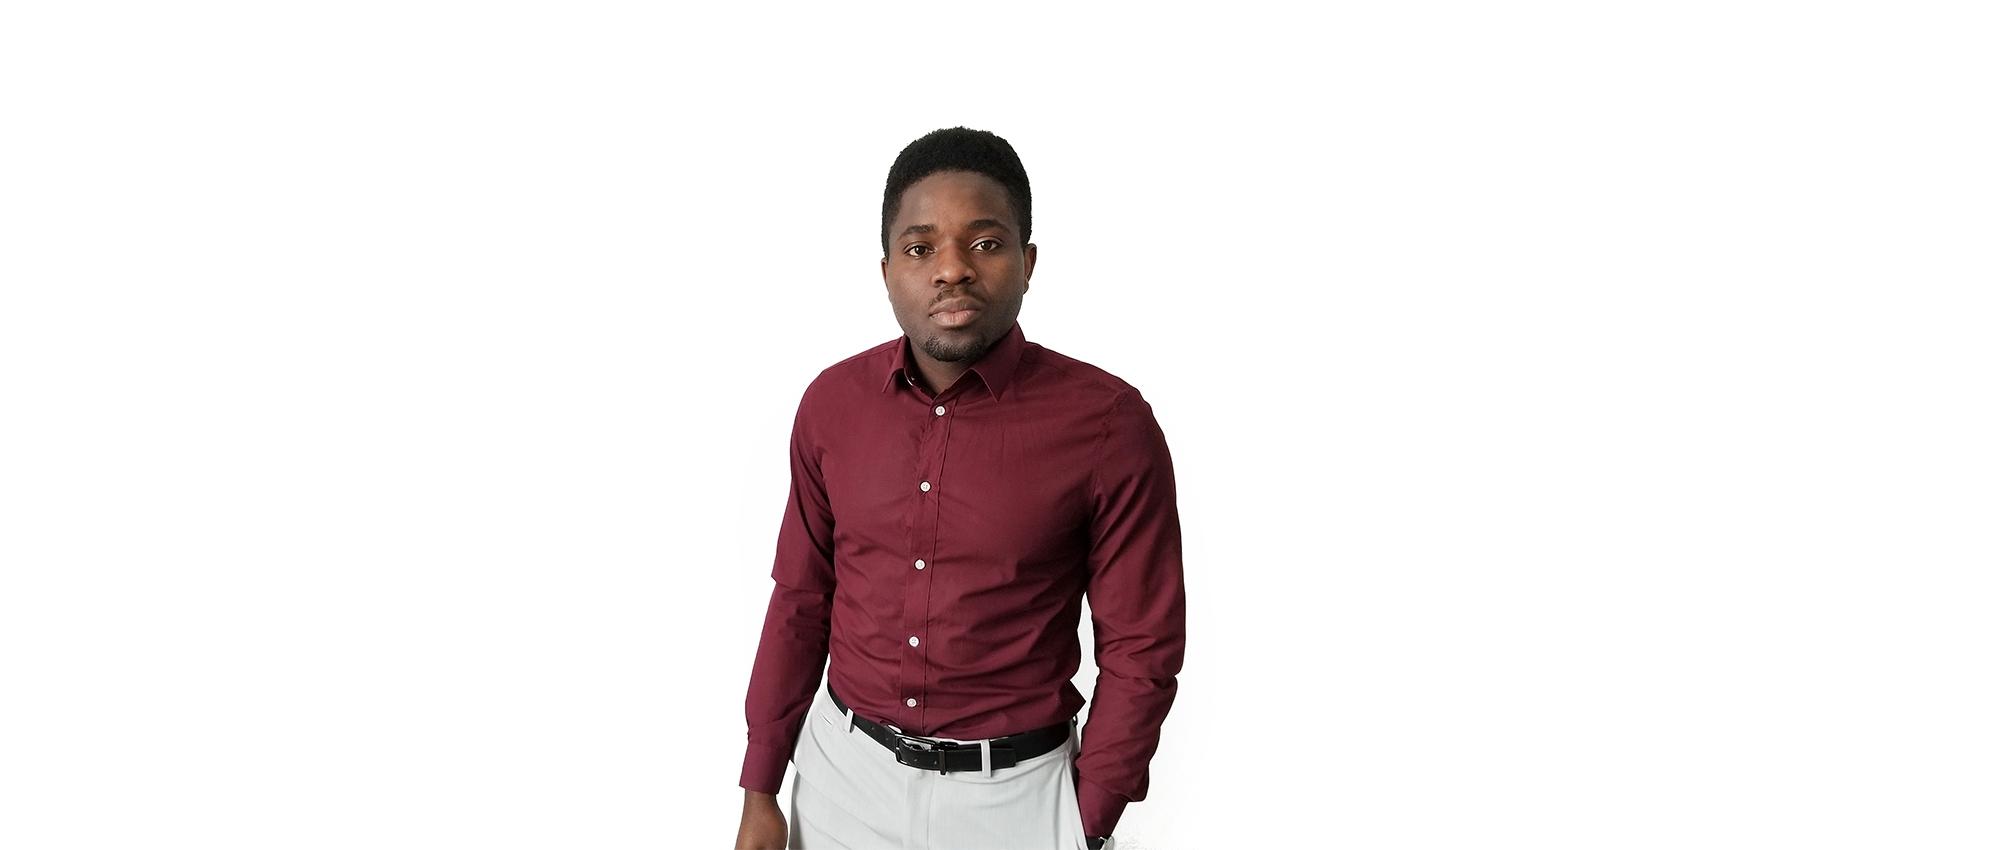 A Black man wearing a red button up shirt in front of a white background.